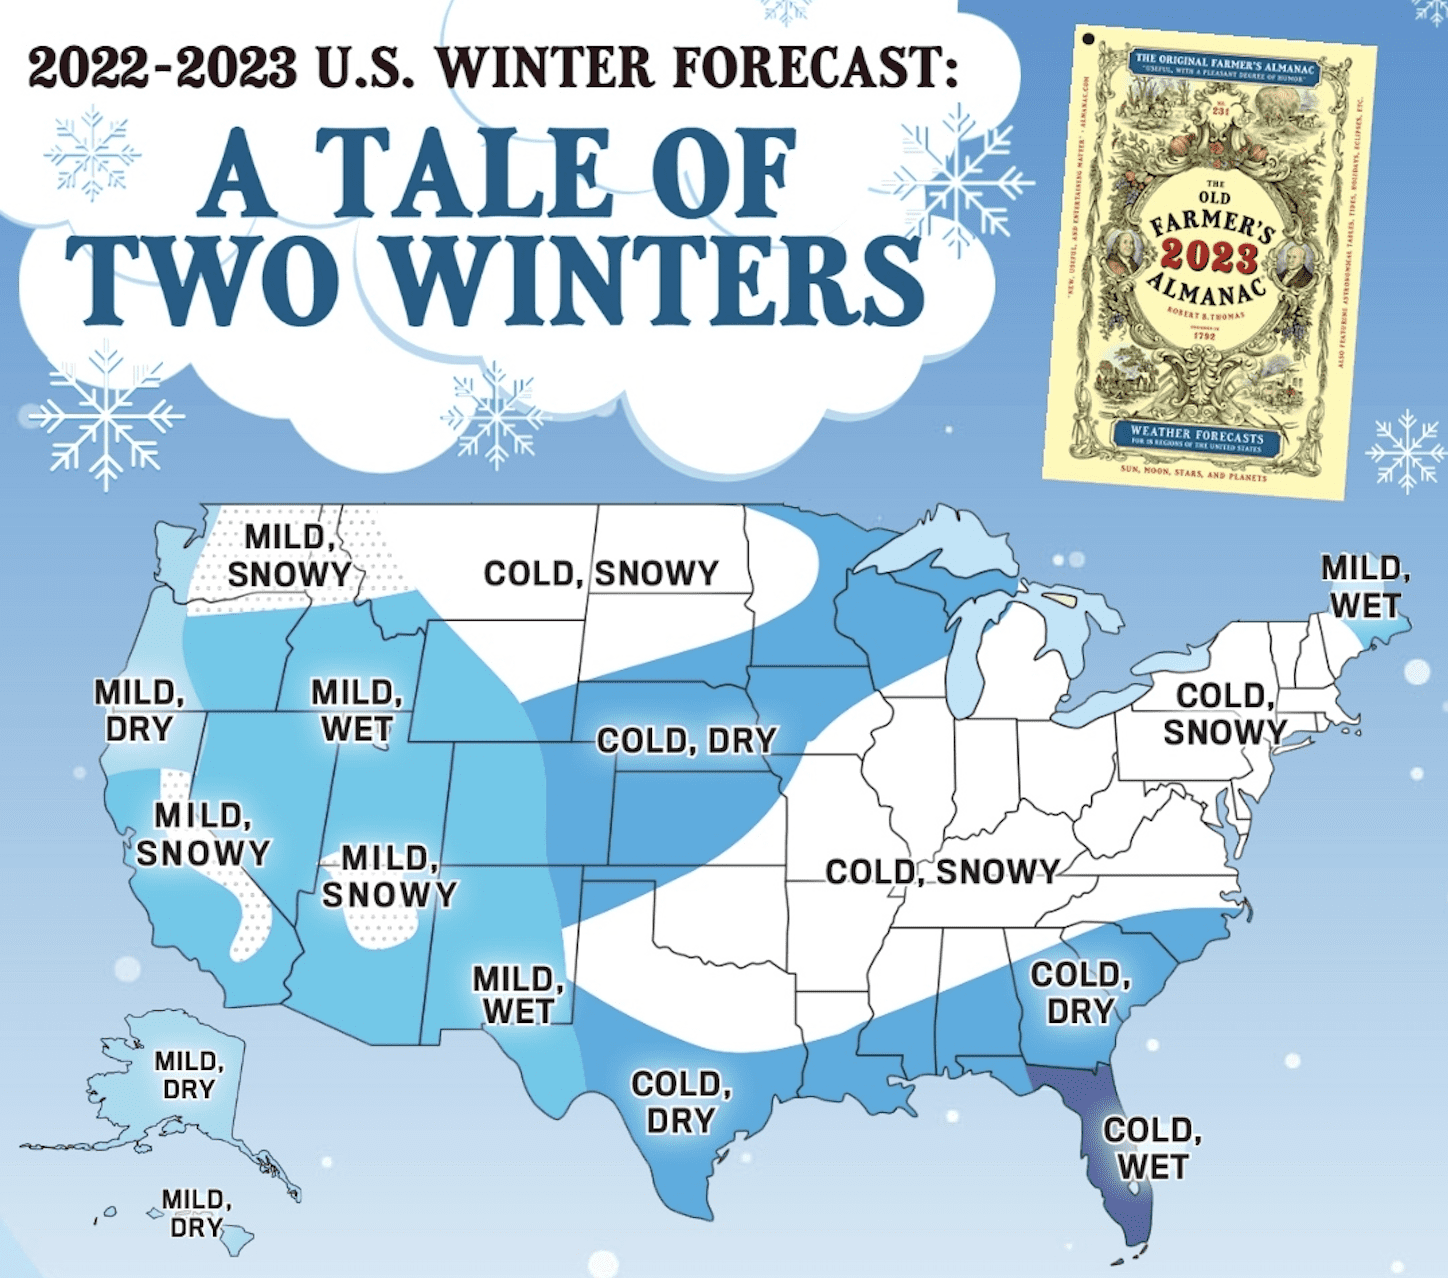 Old Farmers Almanac Predicts “tale Of Two Winters” For 2023 